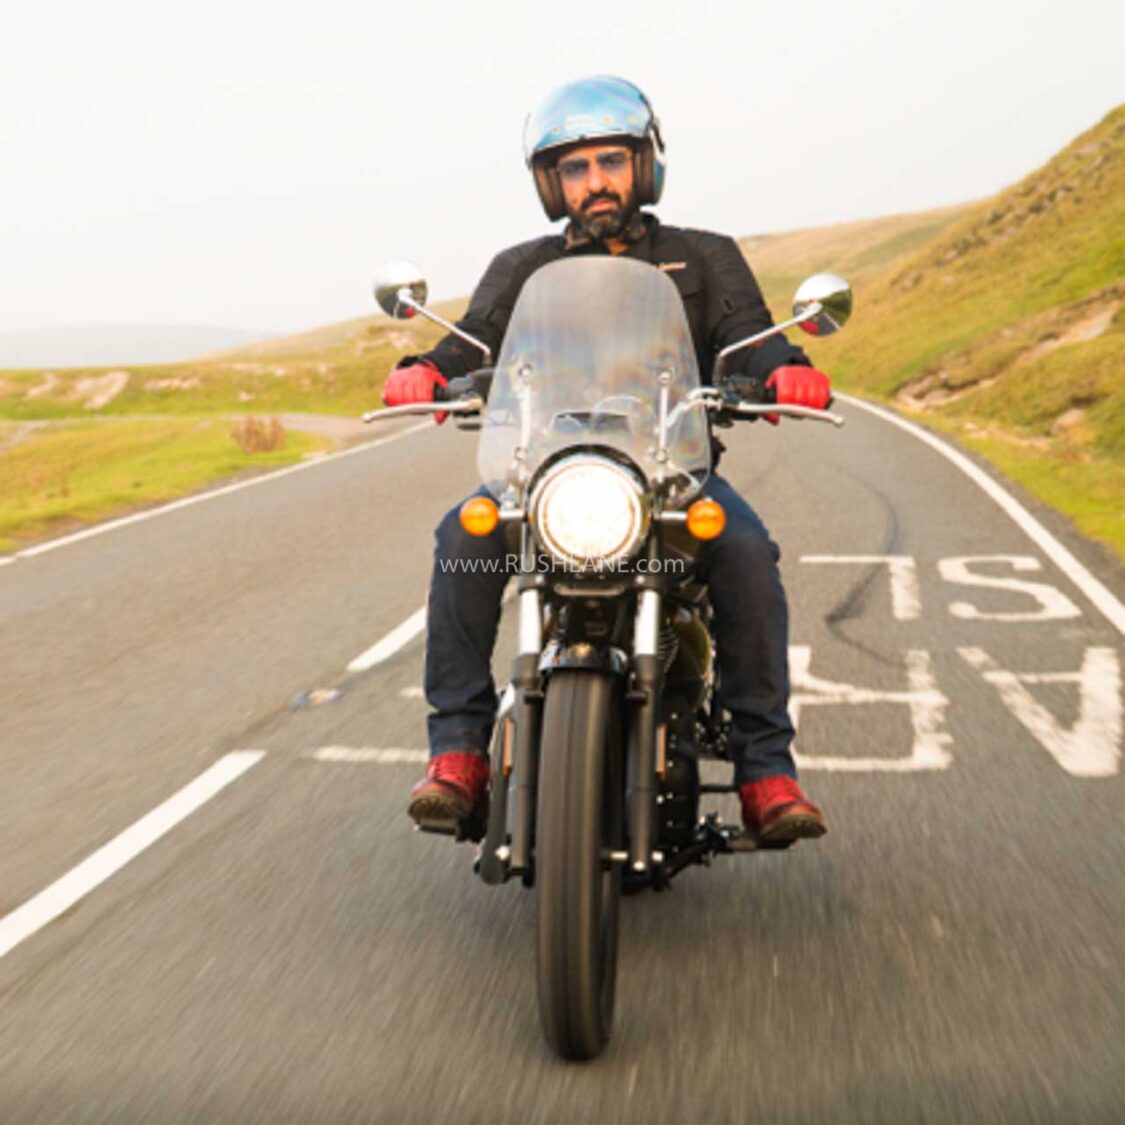 Siddhartha Lal with Royal Enfield Meteor 350